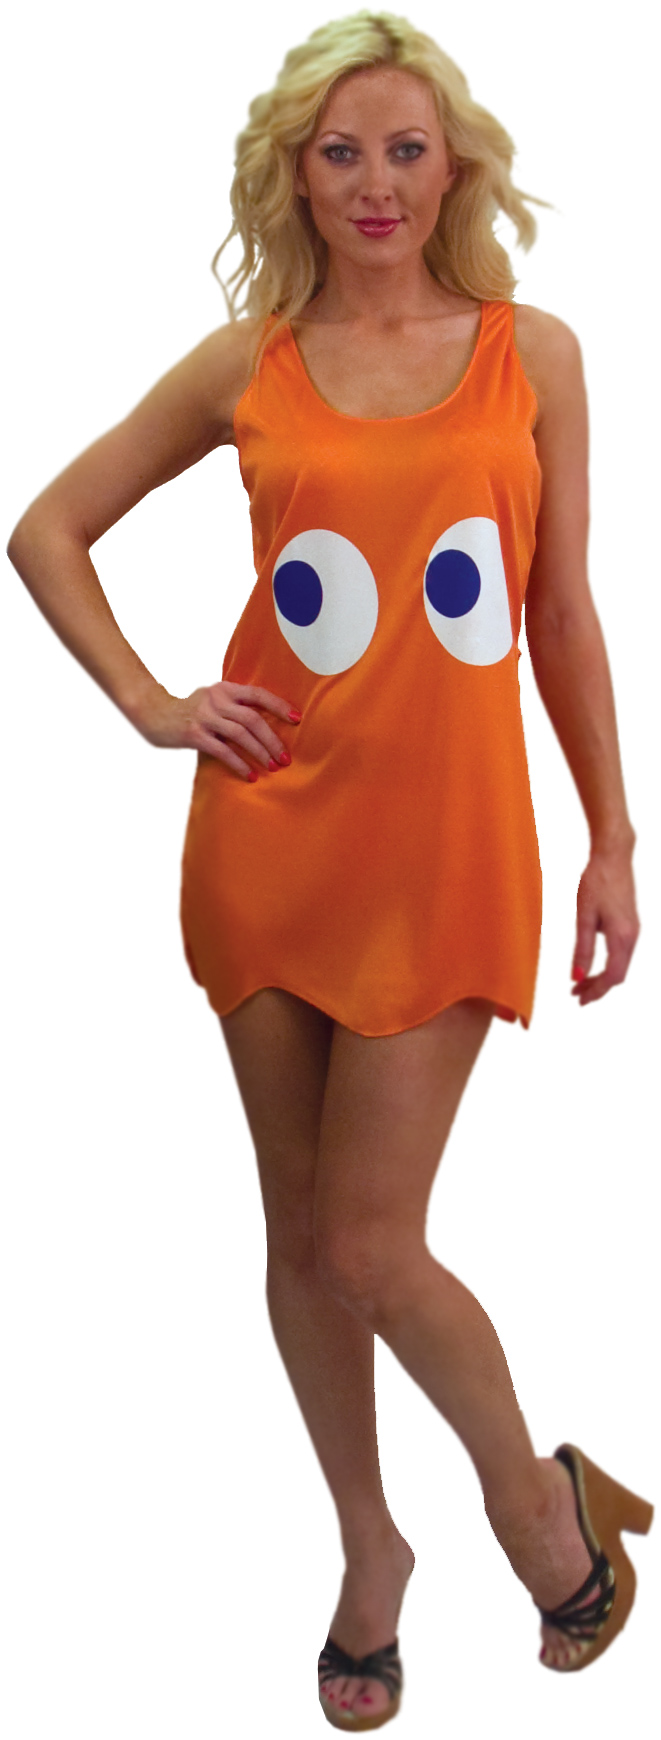 InCogneato Women's Pac-Man Clyde Deluxe Tank Dress Adult Costume - Orange - Standard (One Size)